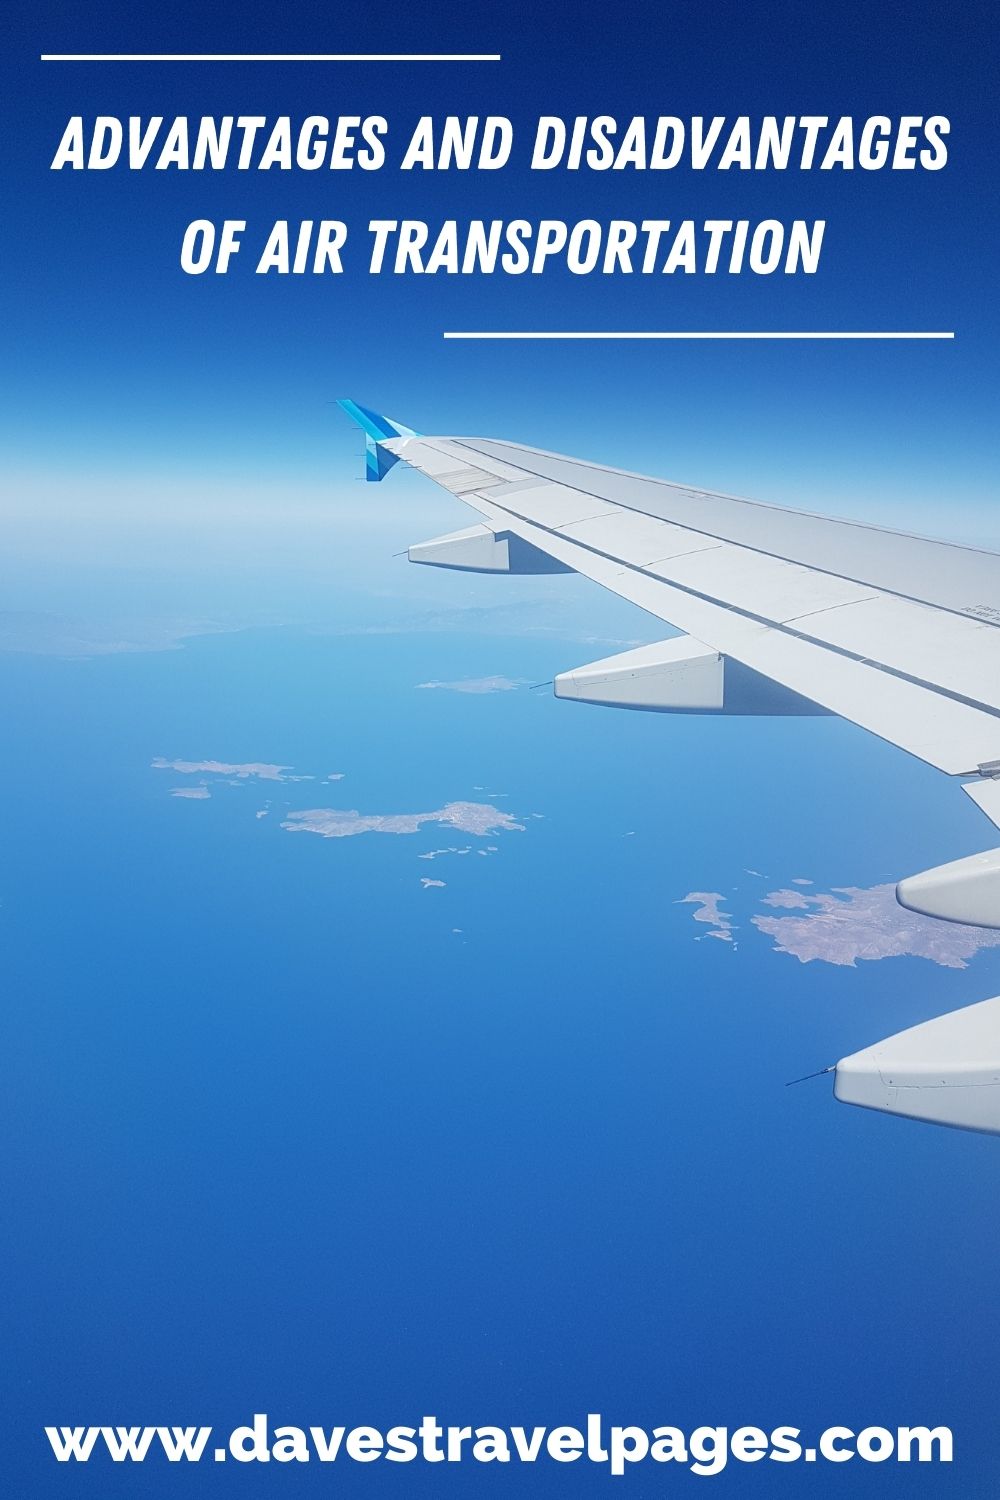 advantages and disadvantages of air travel